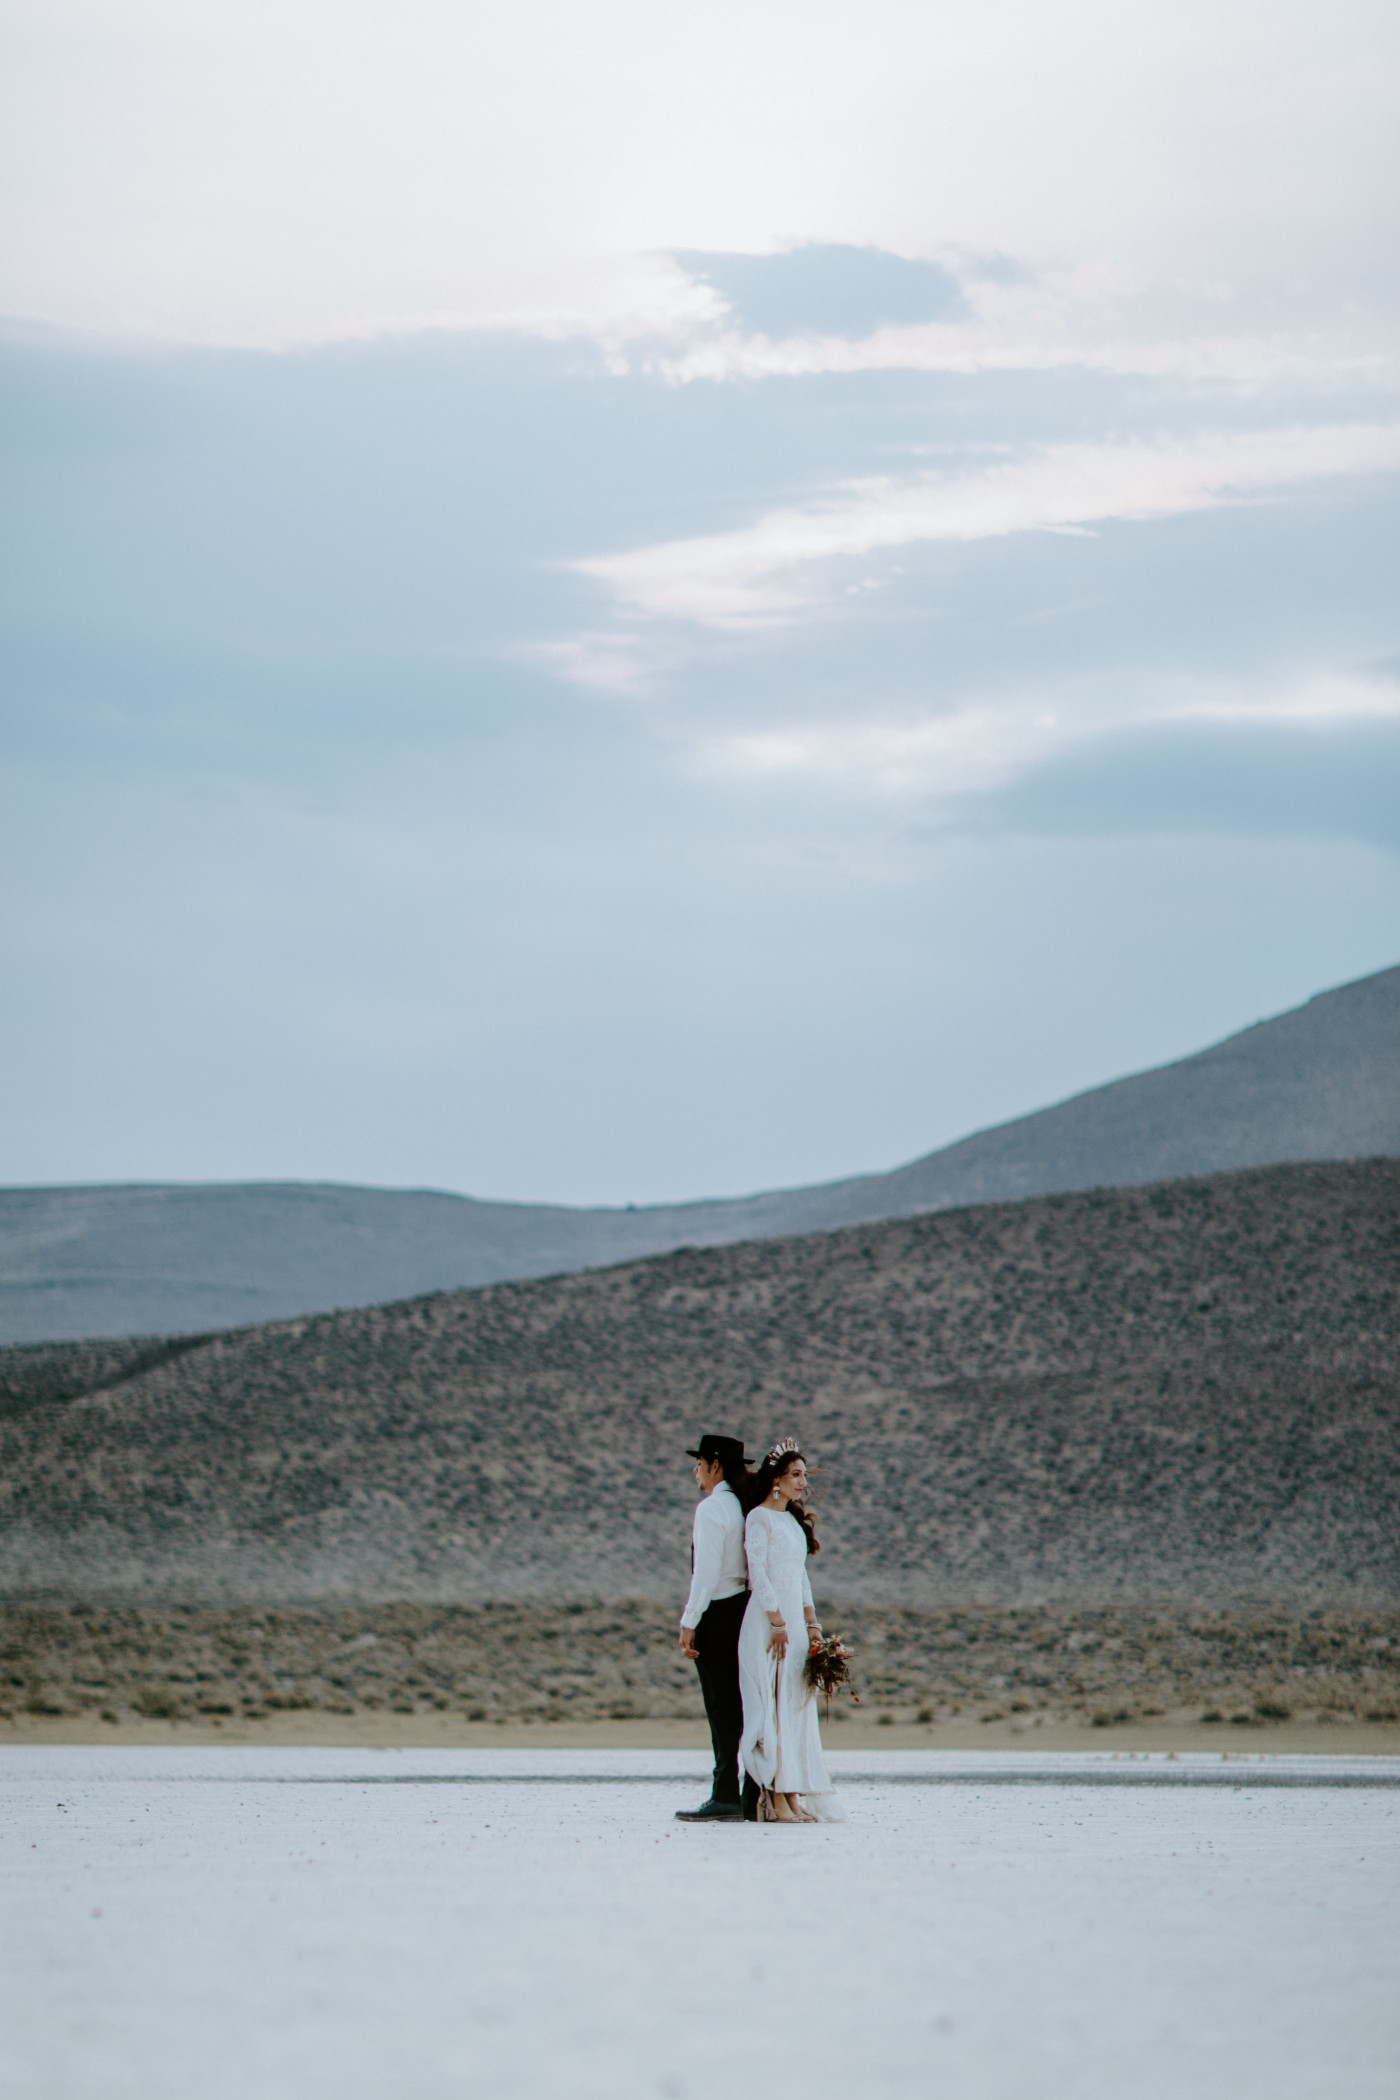 Cameron and Emerald stand back to back in the Alvord Desert after their elopement ceremony.